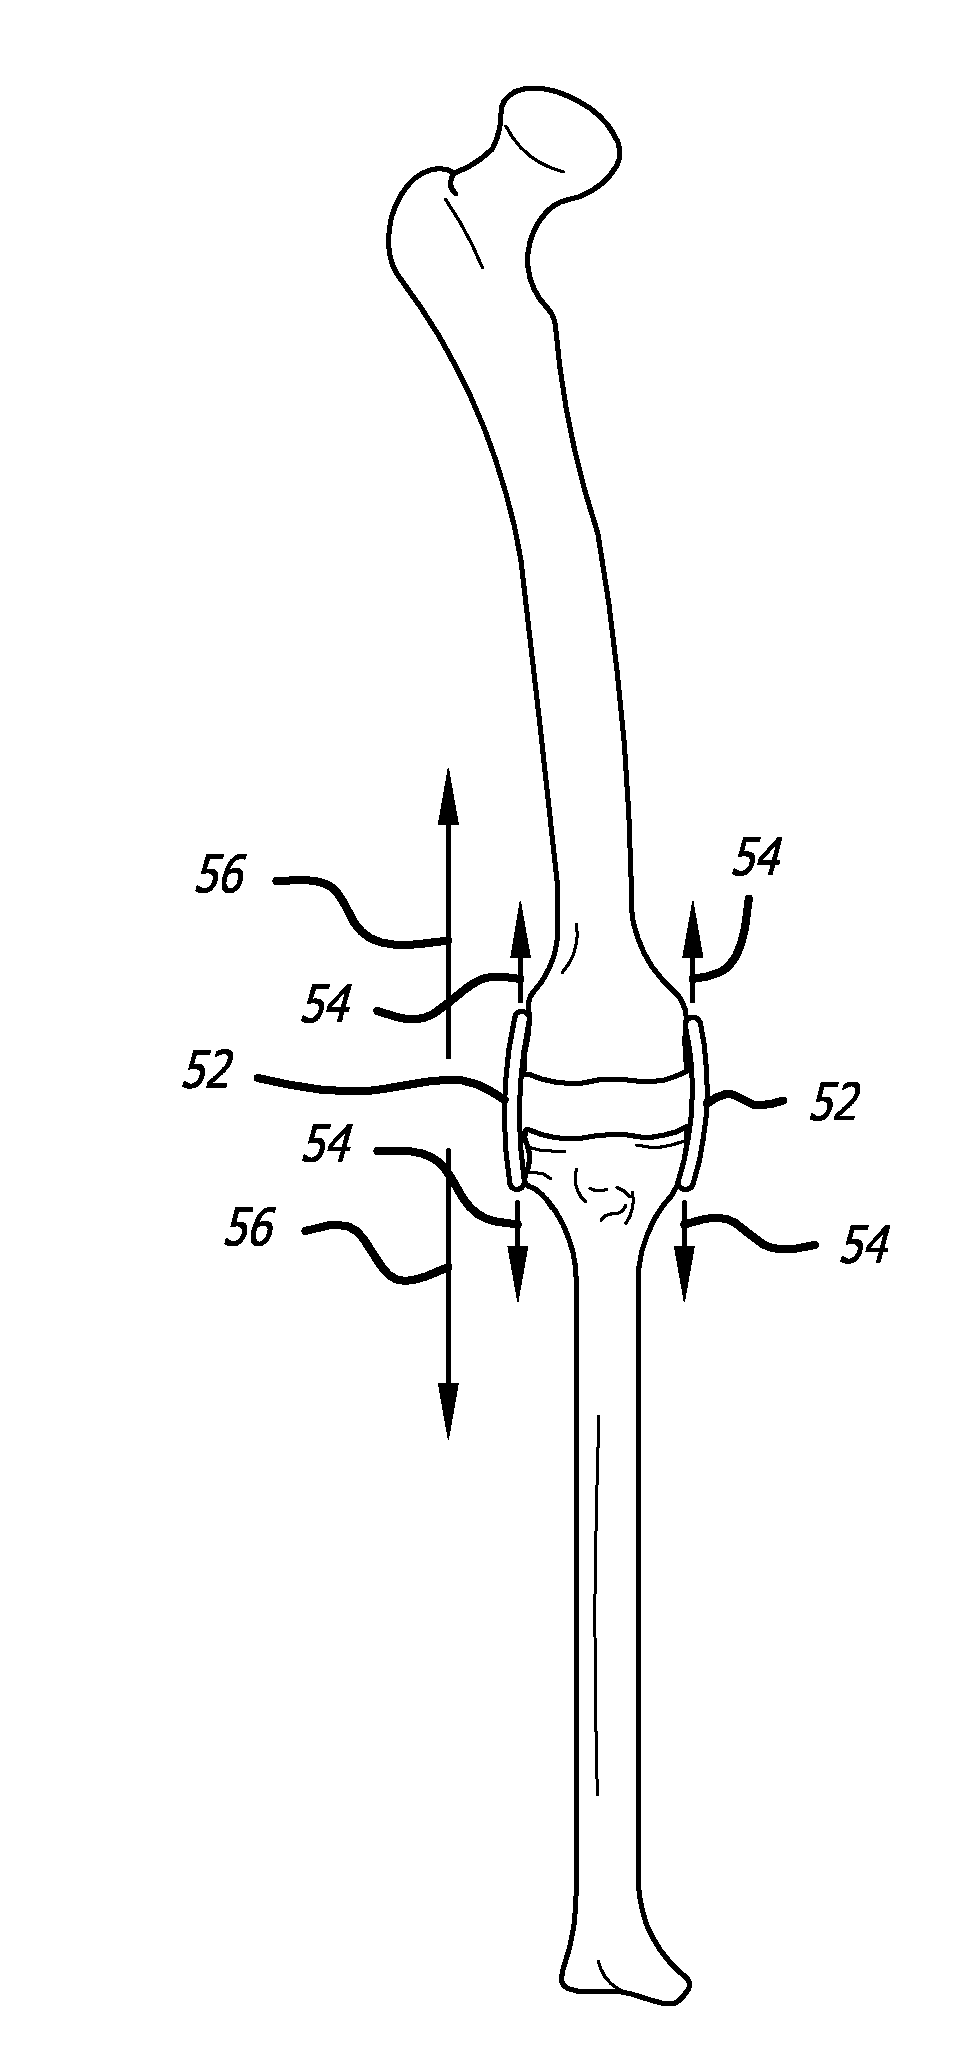 Extra-articular implantable mechanical energy absorbing systems and implantation method